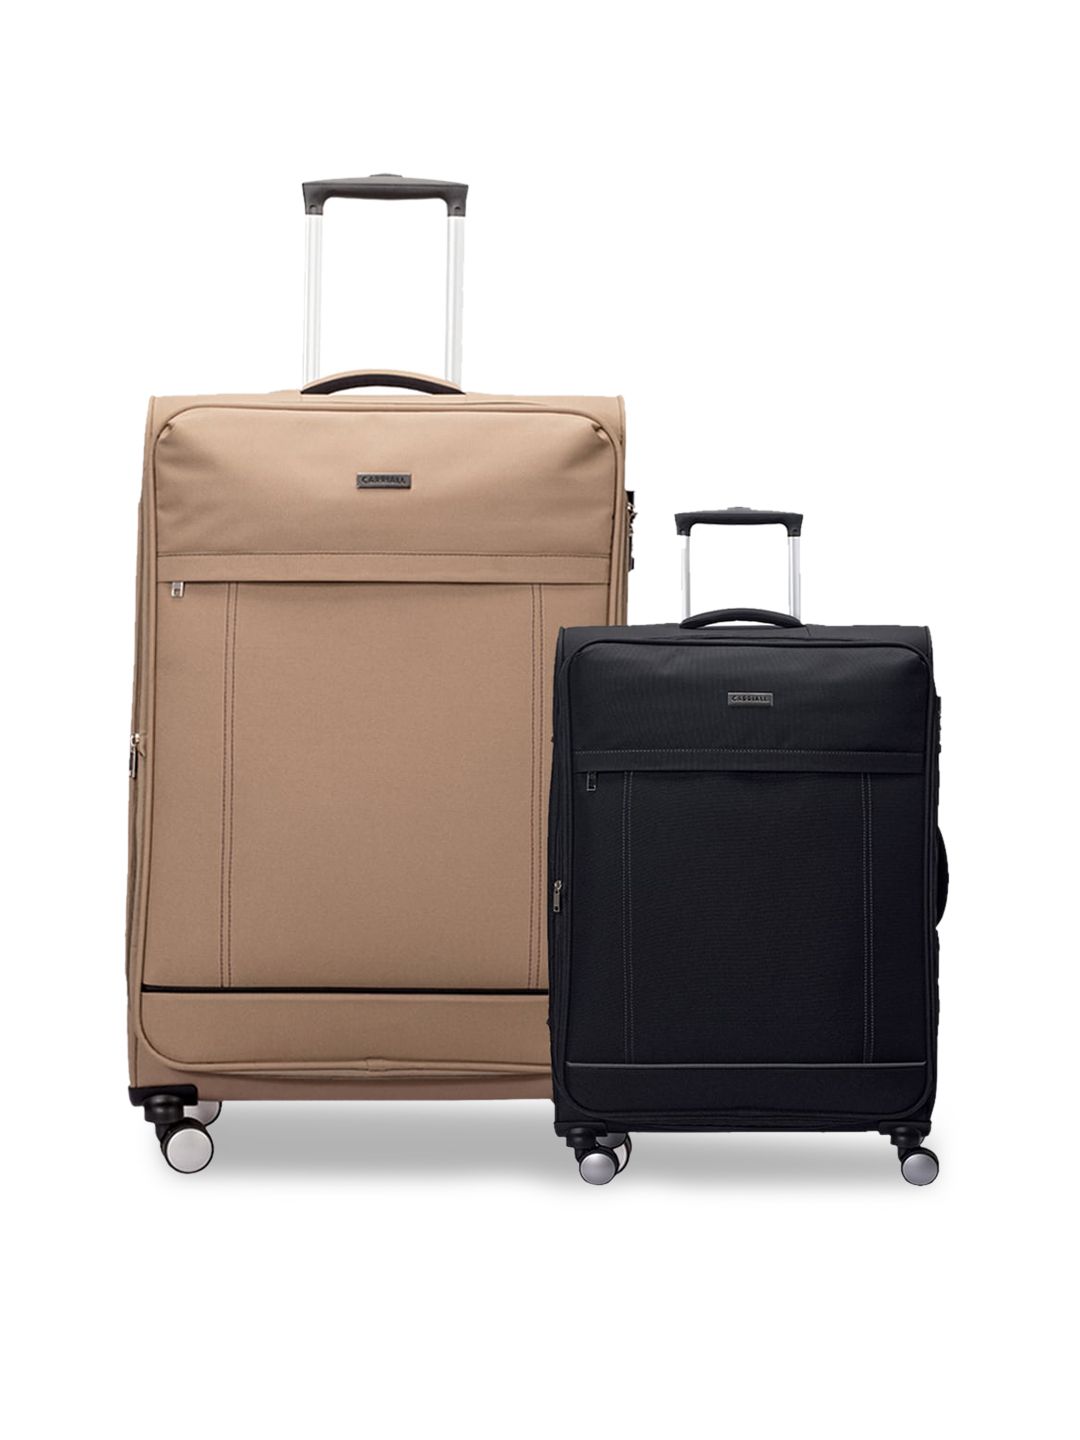 CARRIALL Set of 2 Beige and Black Large & Small Luggage Price in India